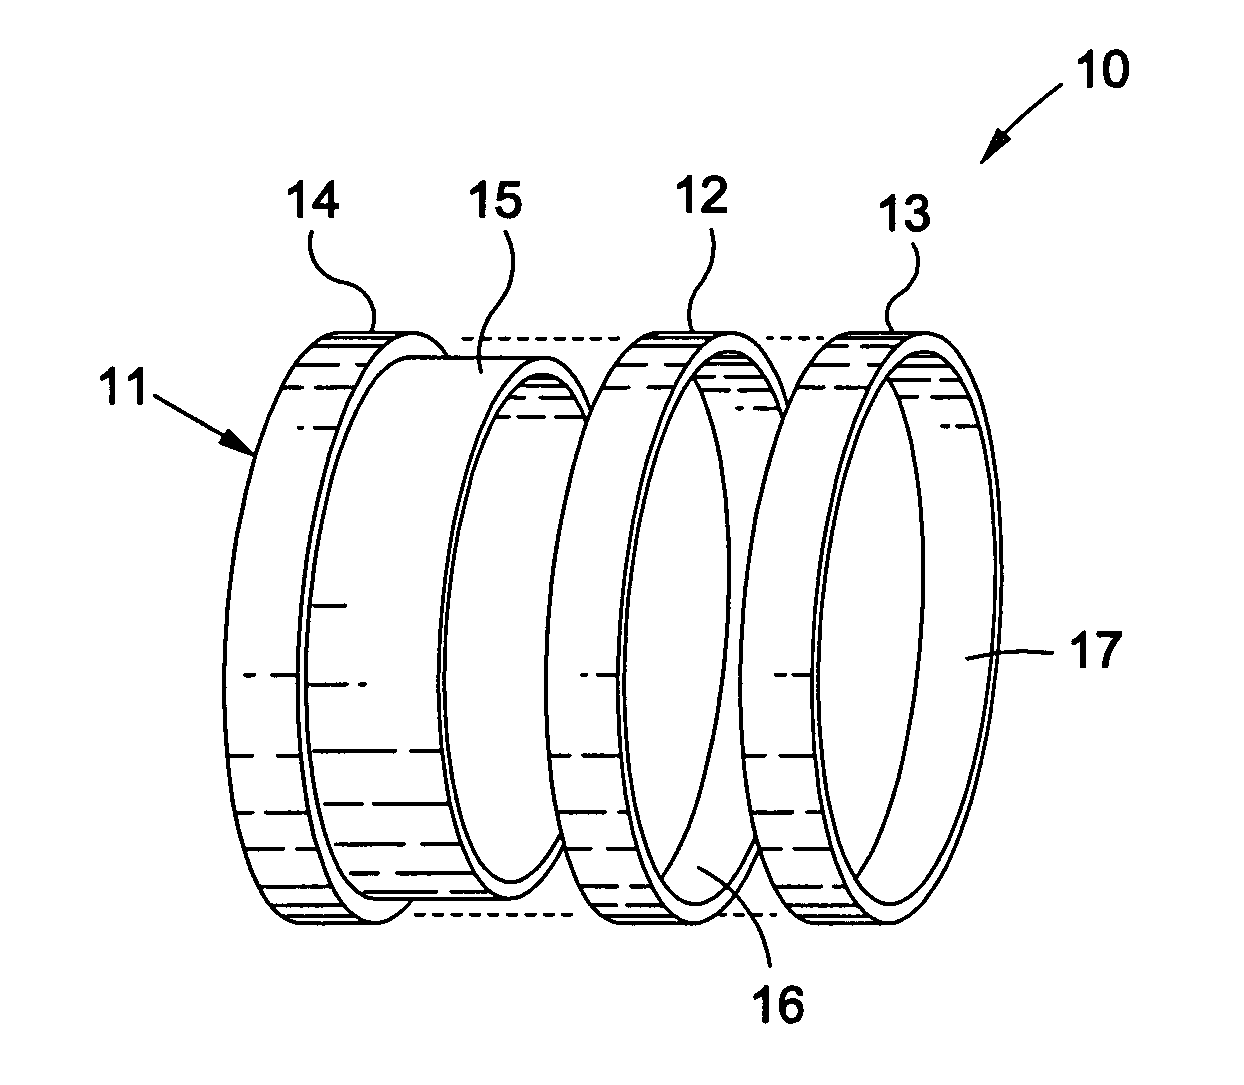 Method of manufacturing multi-element tungsten carbide jewelry rings